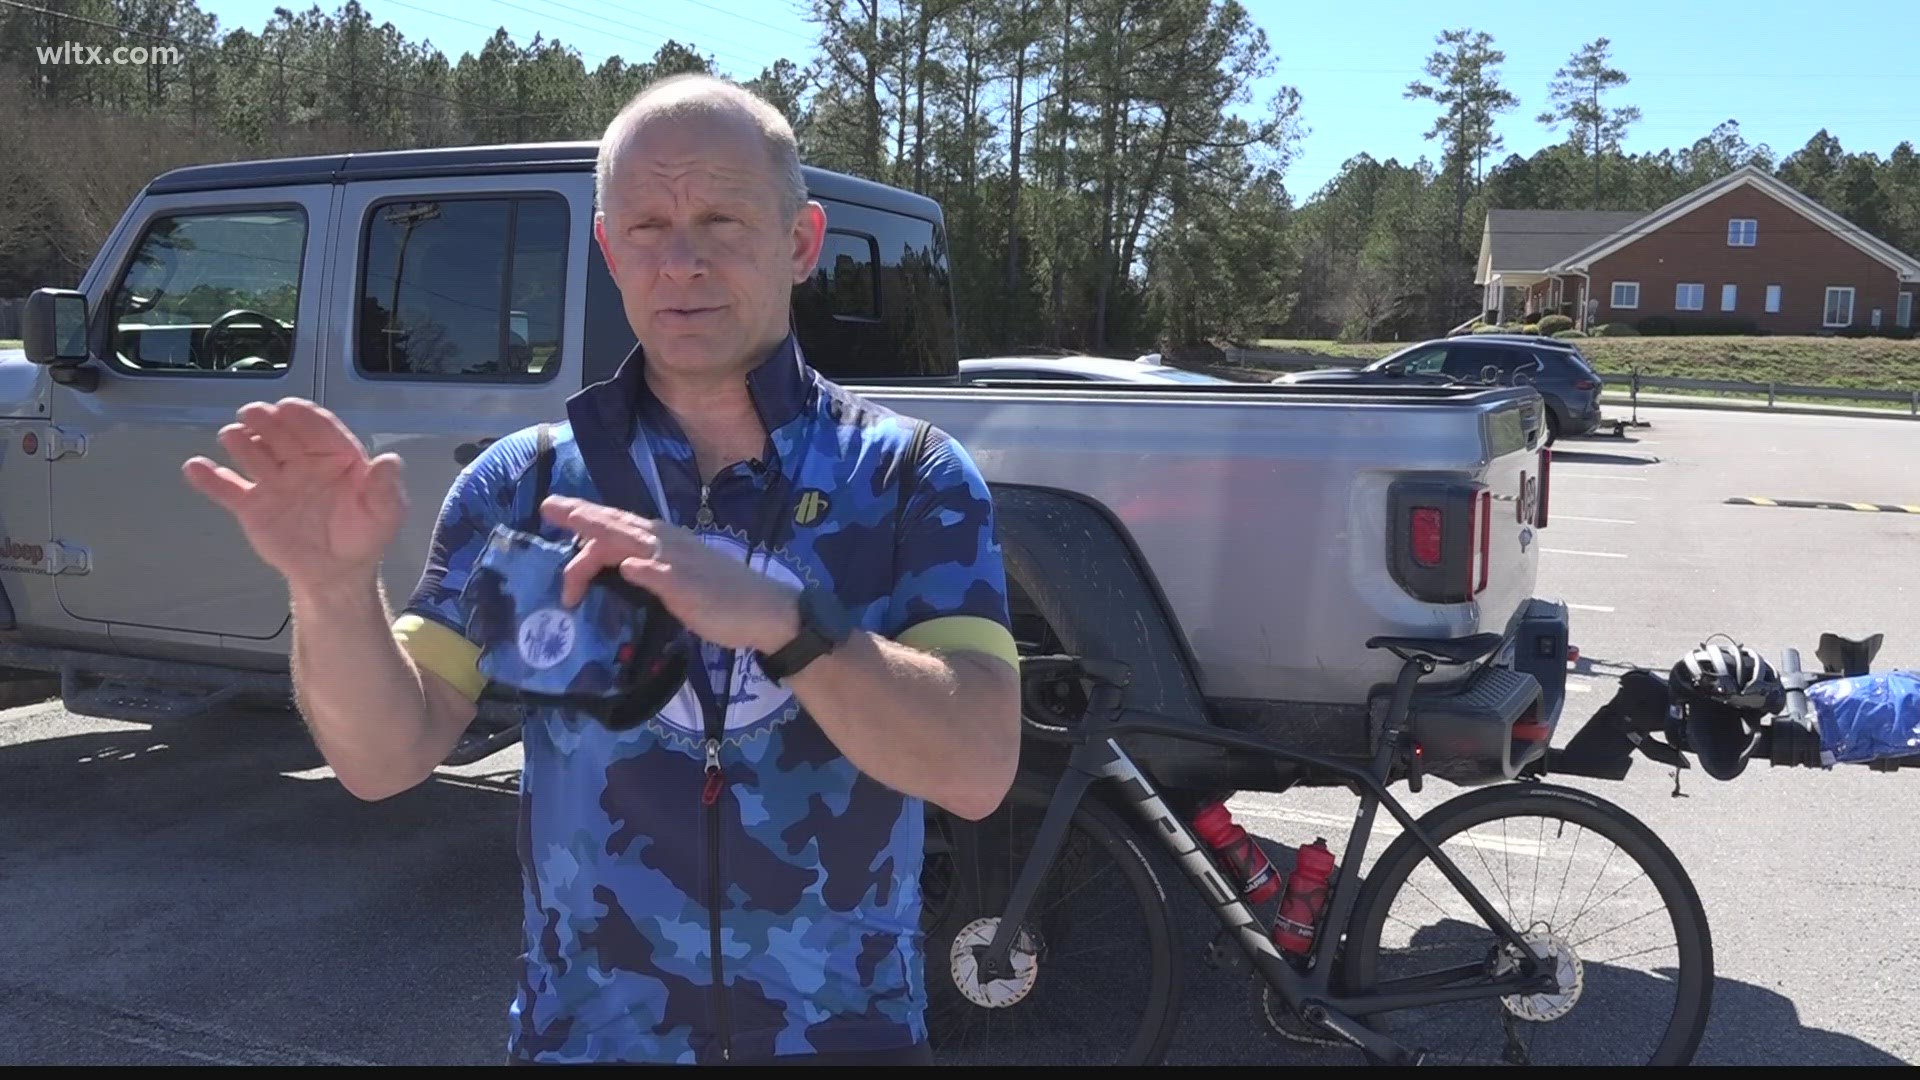 Palmetto Pedalers wants to raise safety awareness, share riding tips